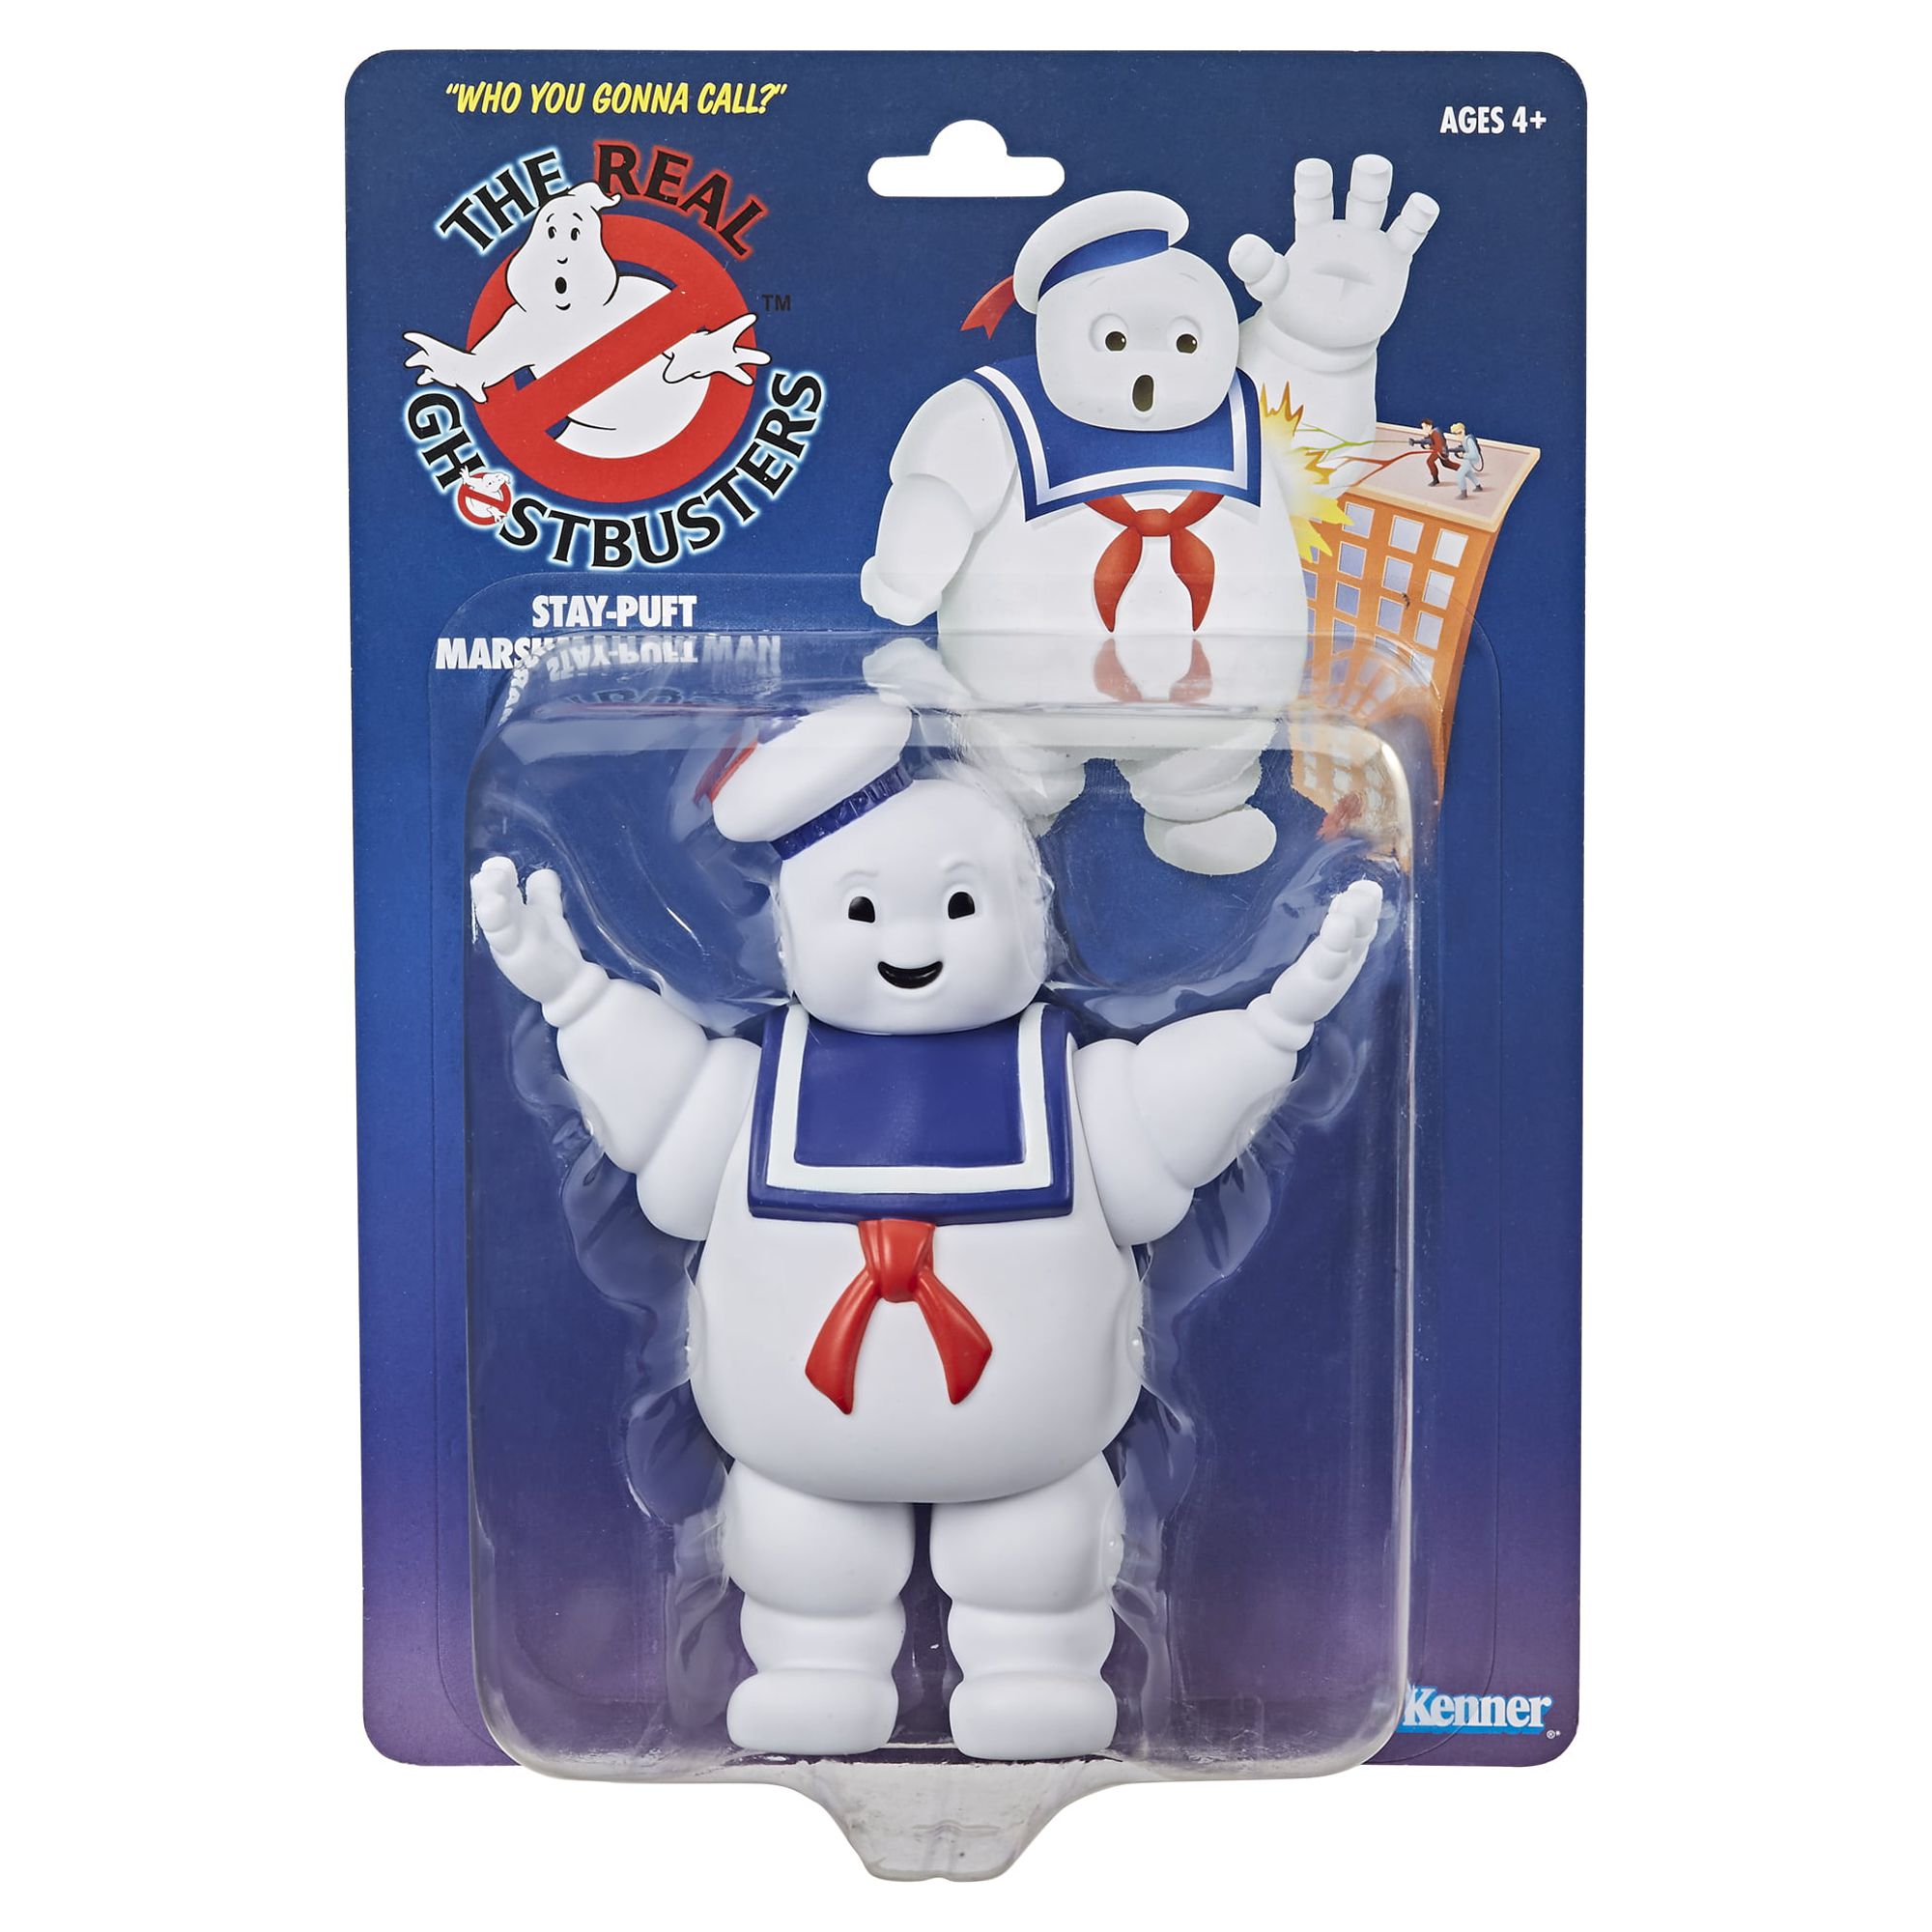 Ghostbusters Kenner Classics Stay-Puft Marshmallow Man - image 5 of 7